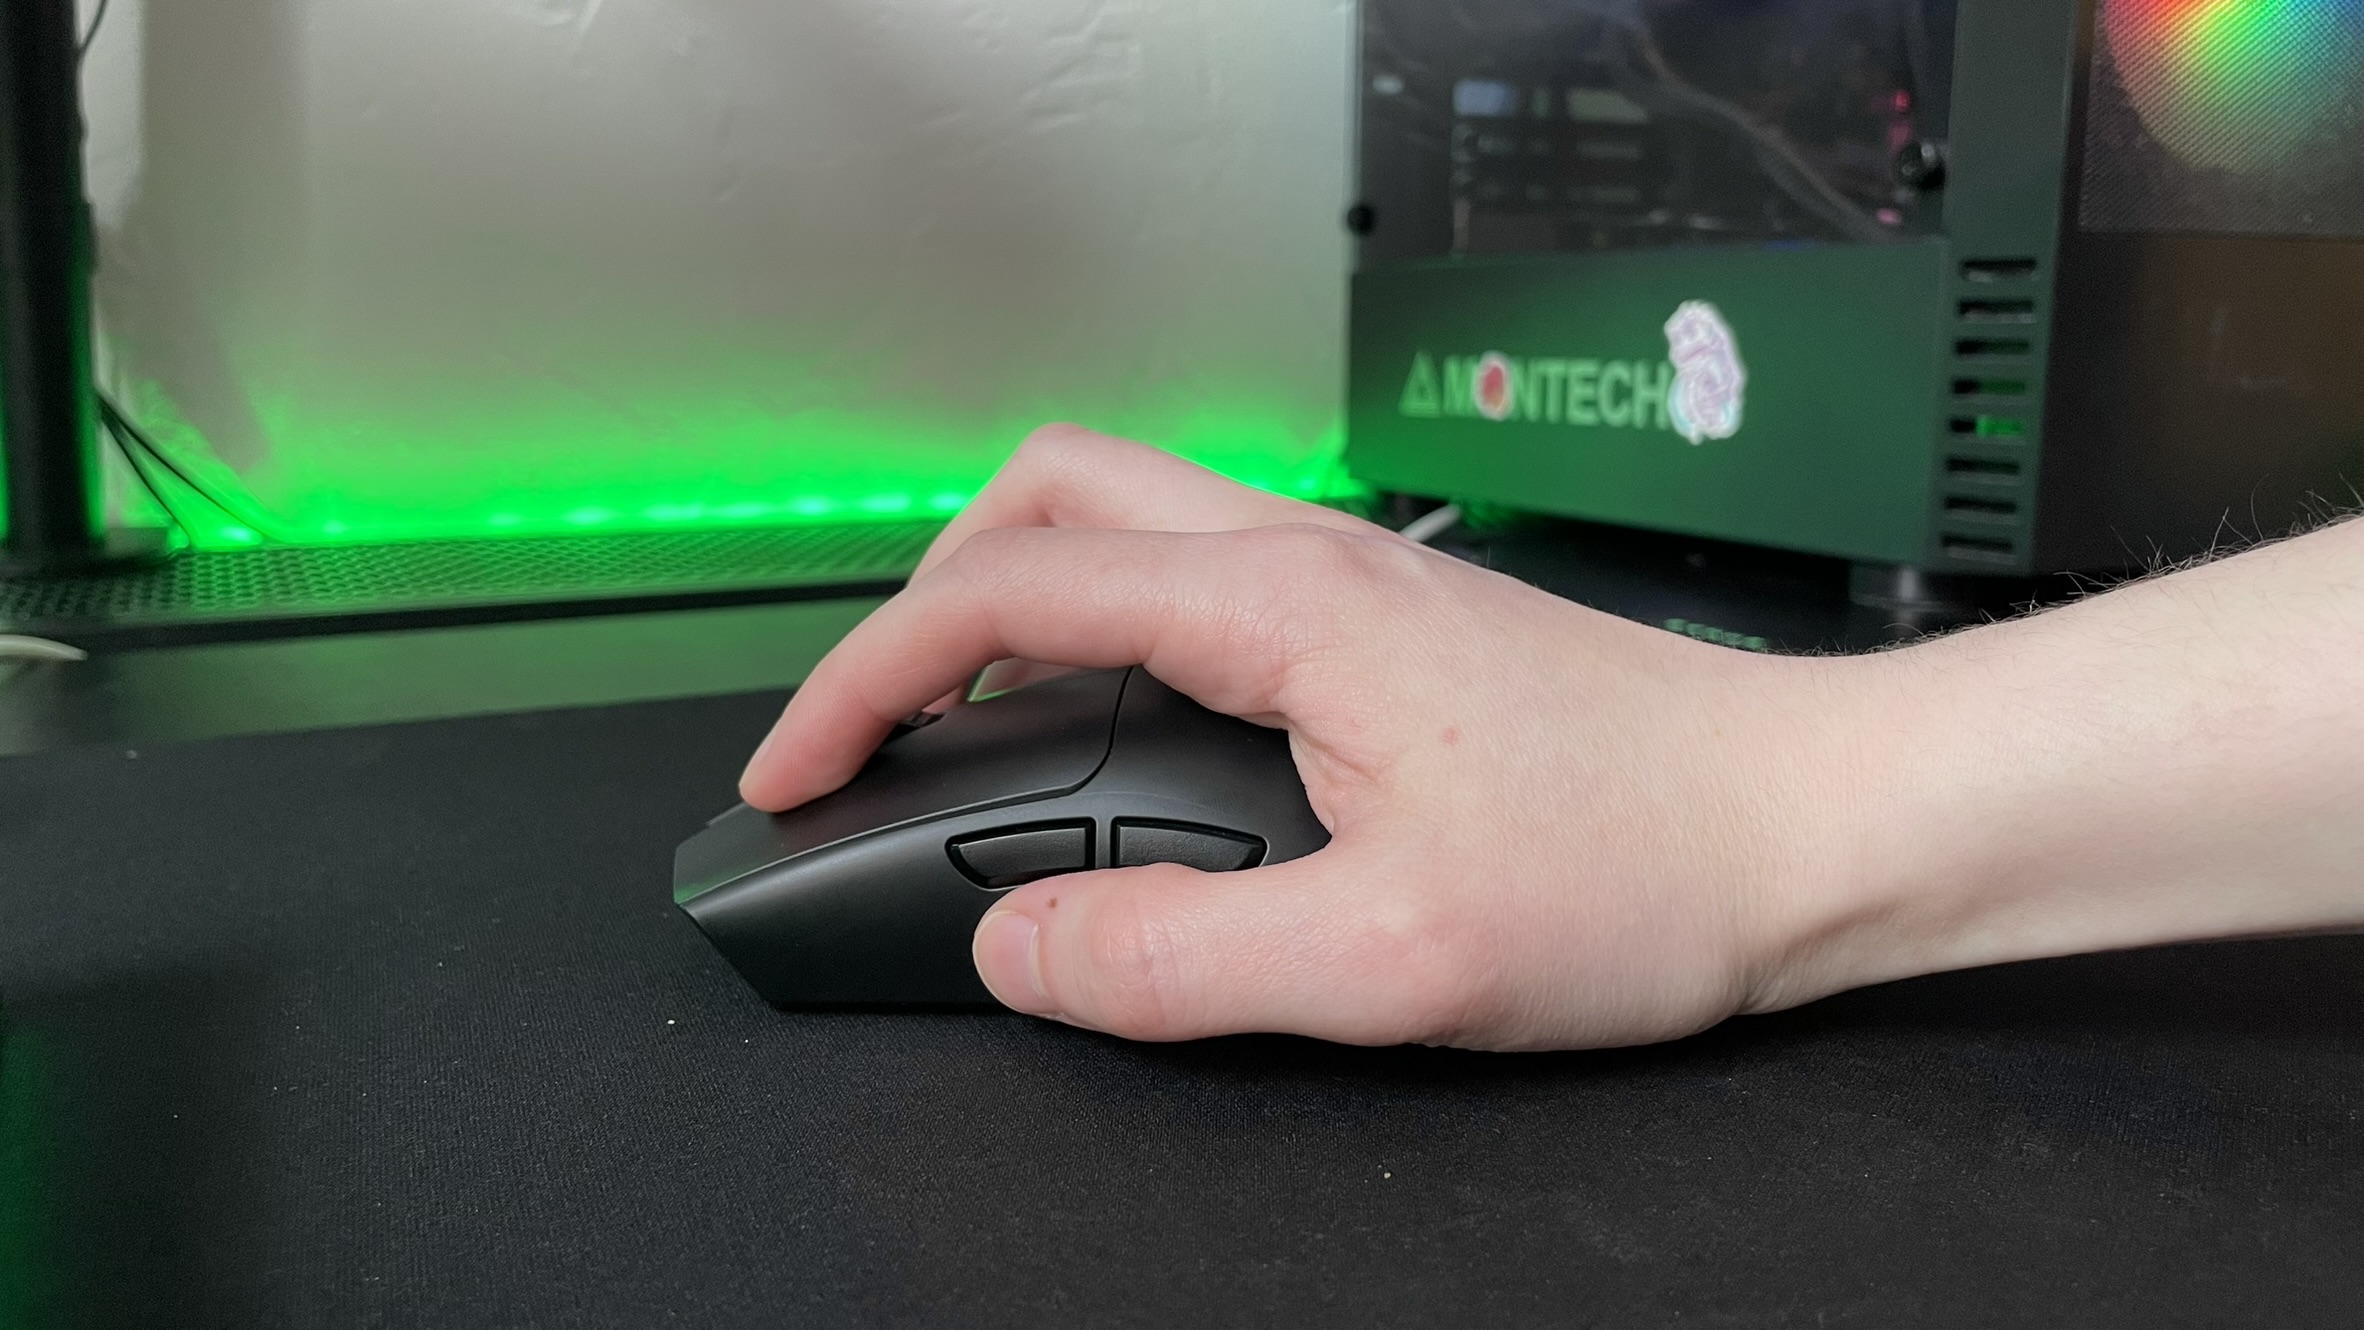 The Razer Viper V3 Pro is perfect for claw grip styles